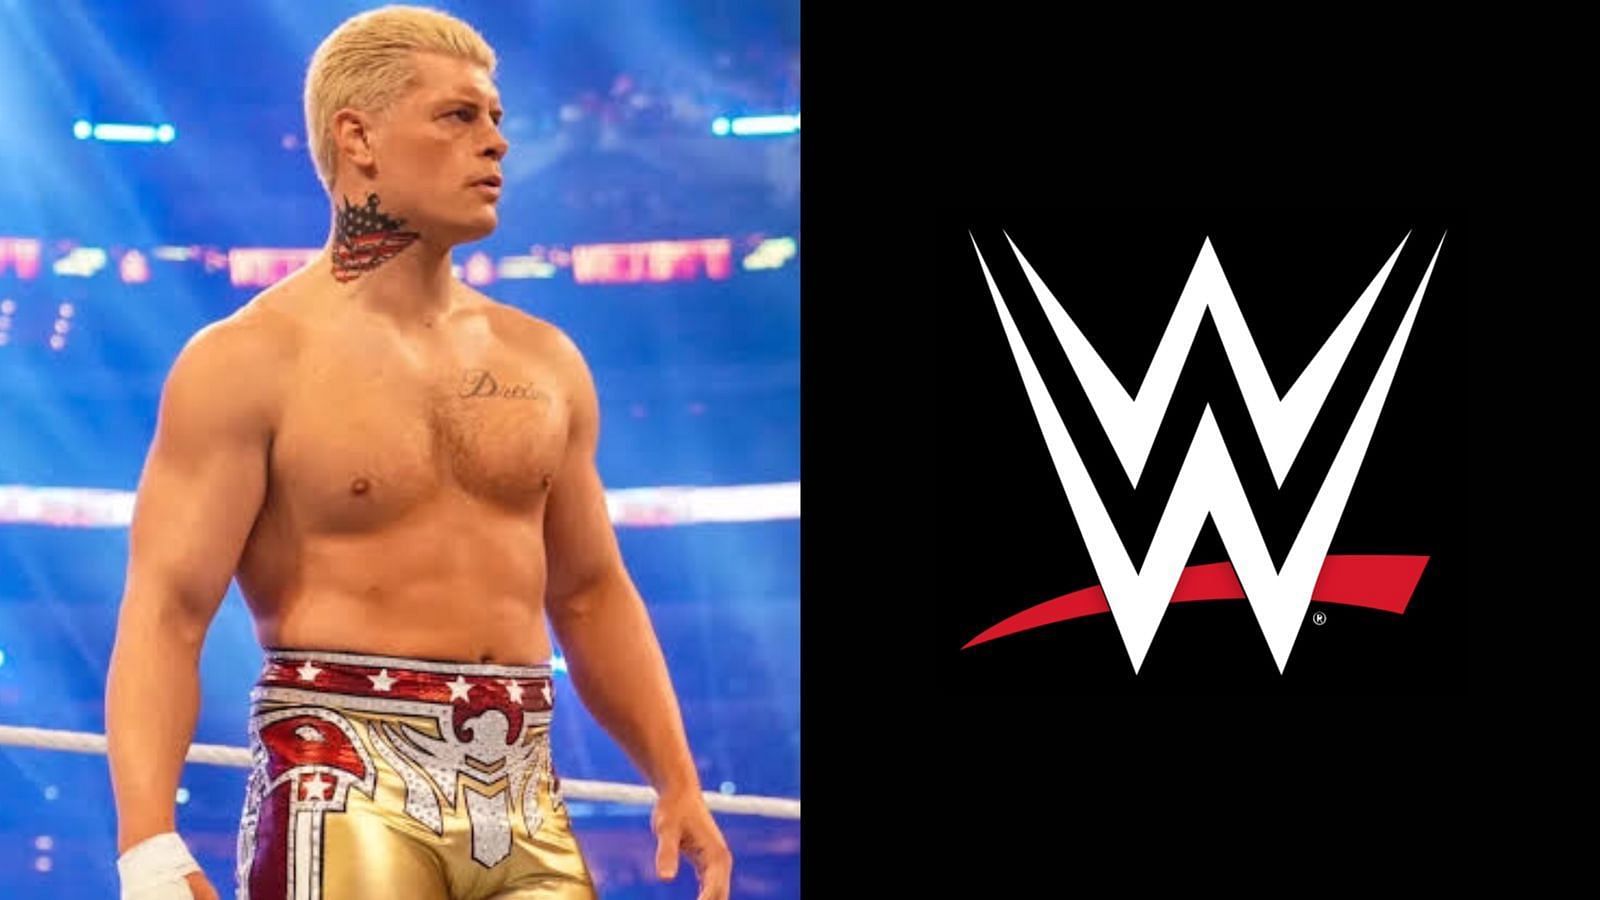 Cody Rhodes made his return to WWE at WrestleMania 38 